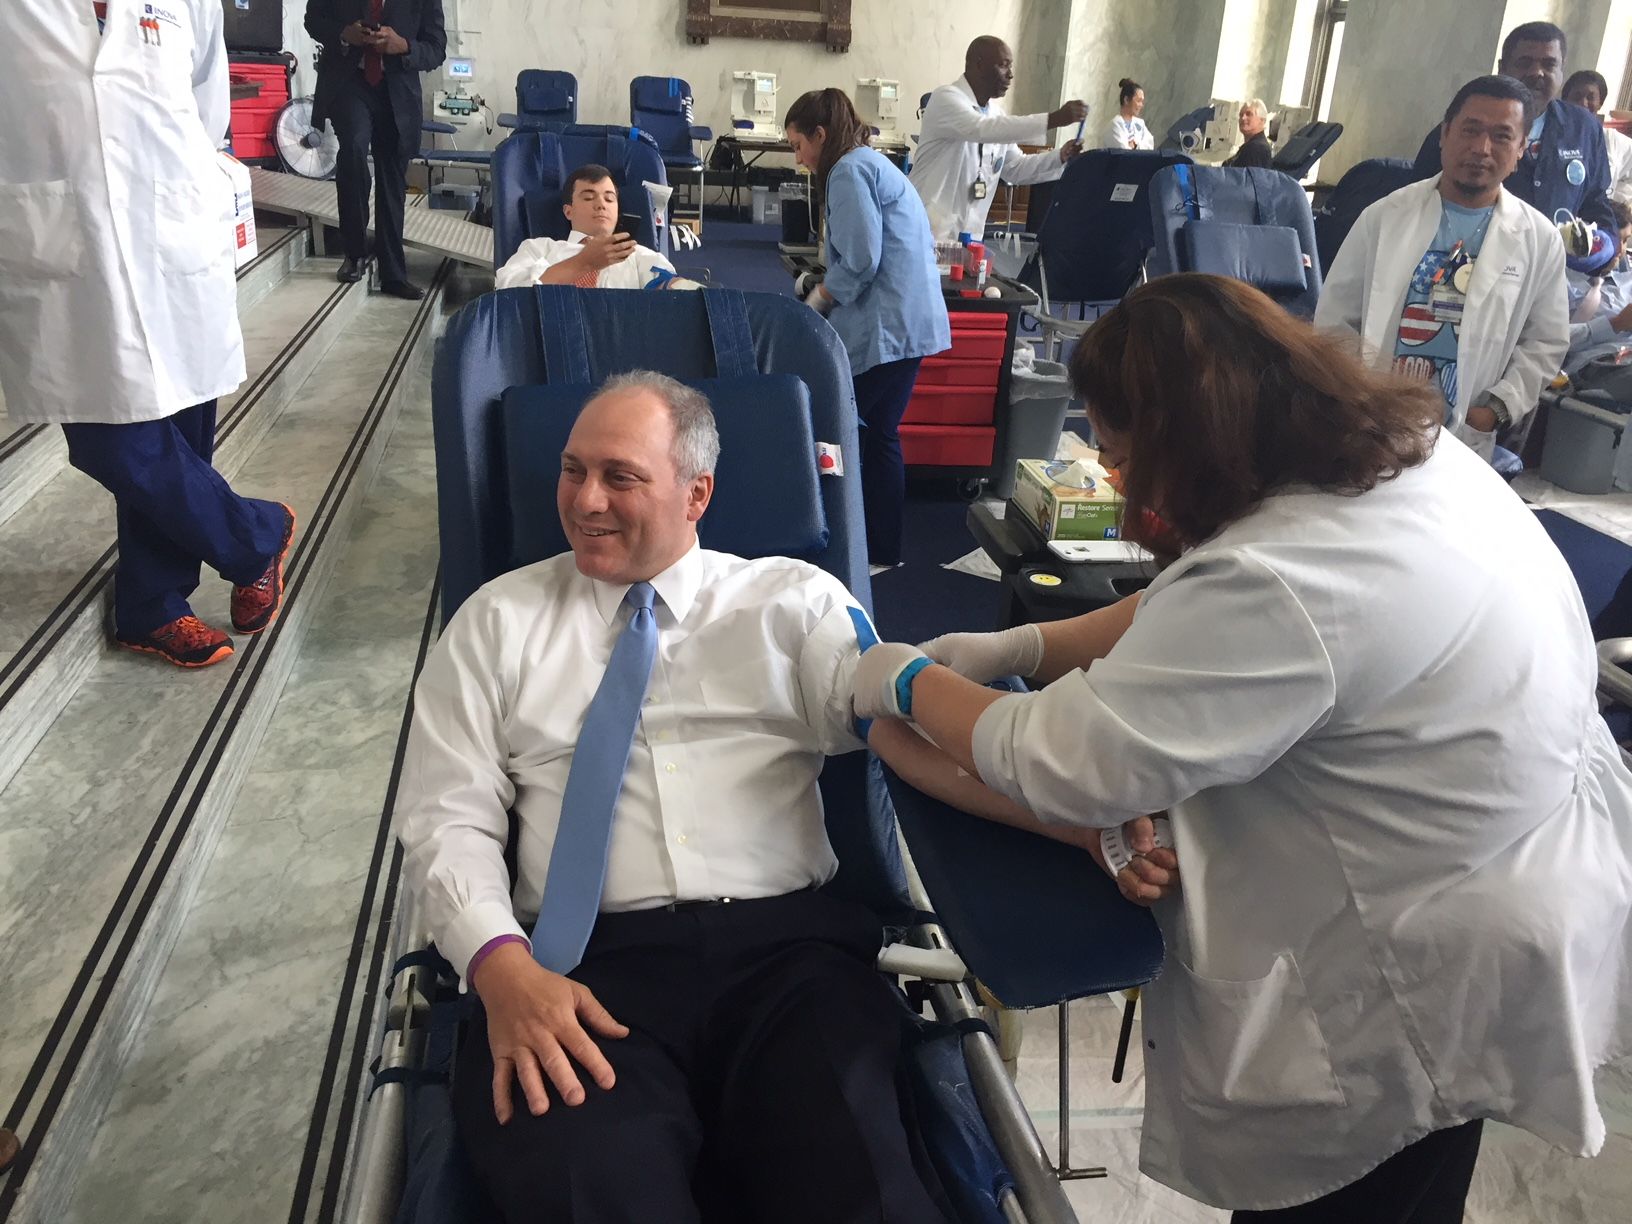 Steve Scalise giving blood at the annual Congressional Blood Drive. (WTOP/John Domen)